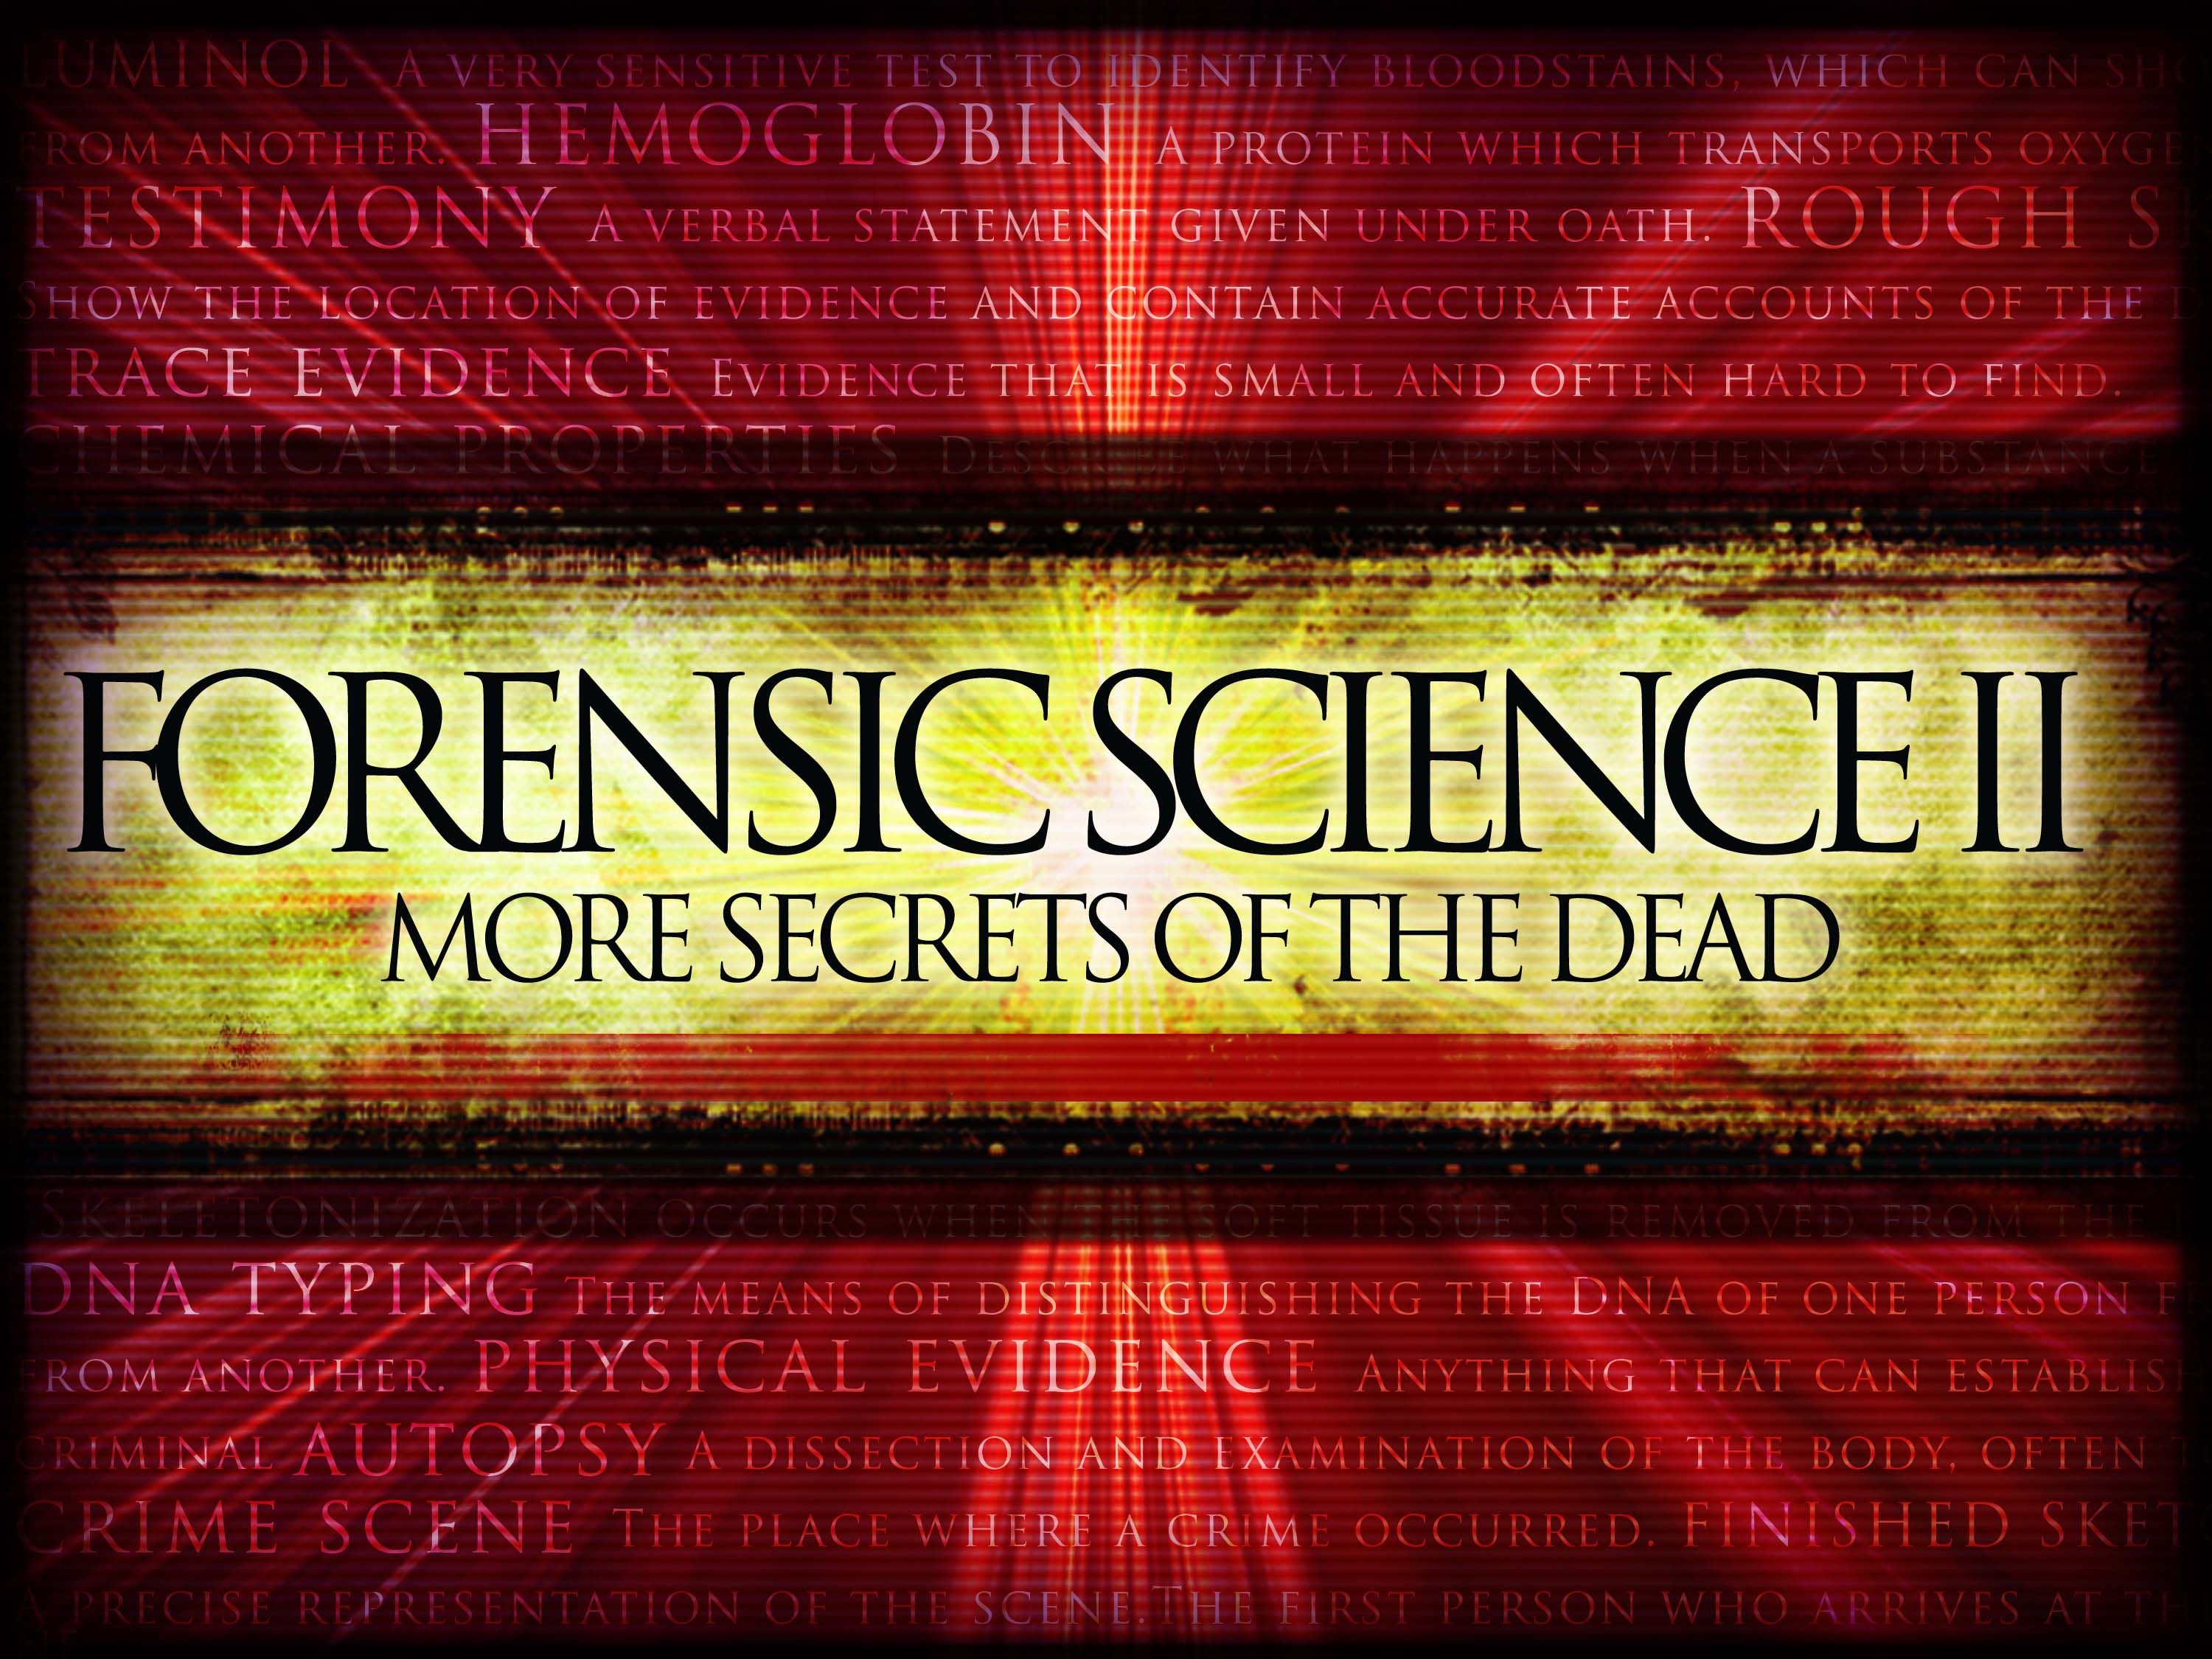 Forensic Science 2: More Secrets of the Dead